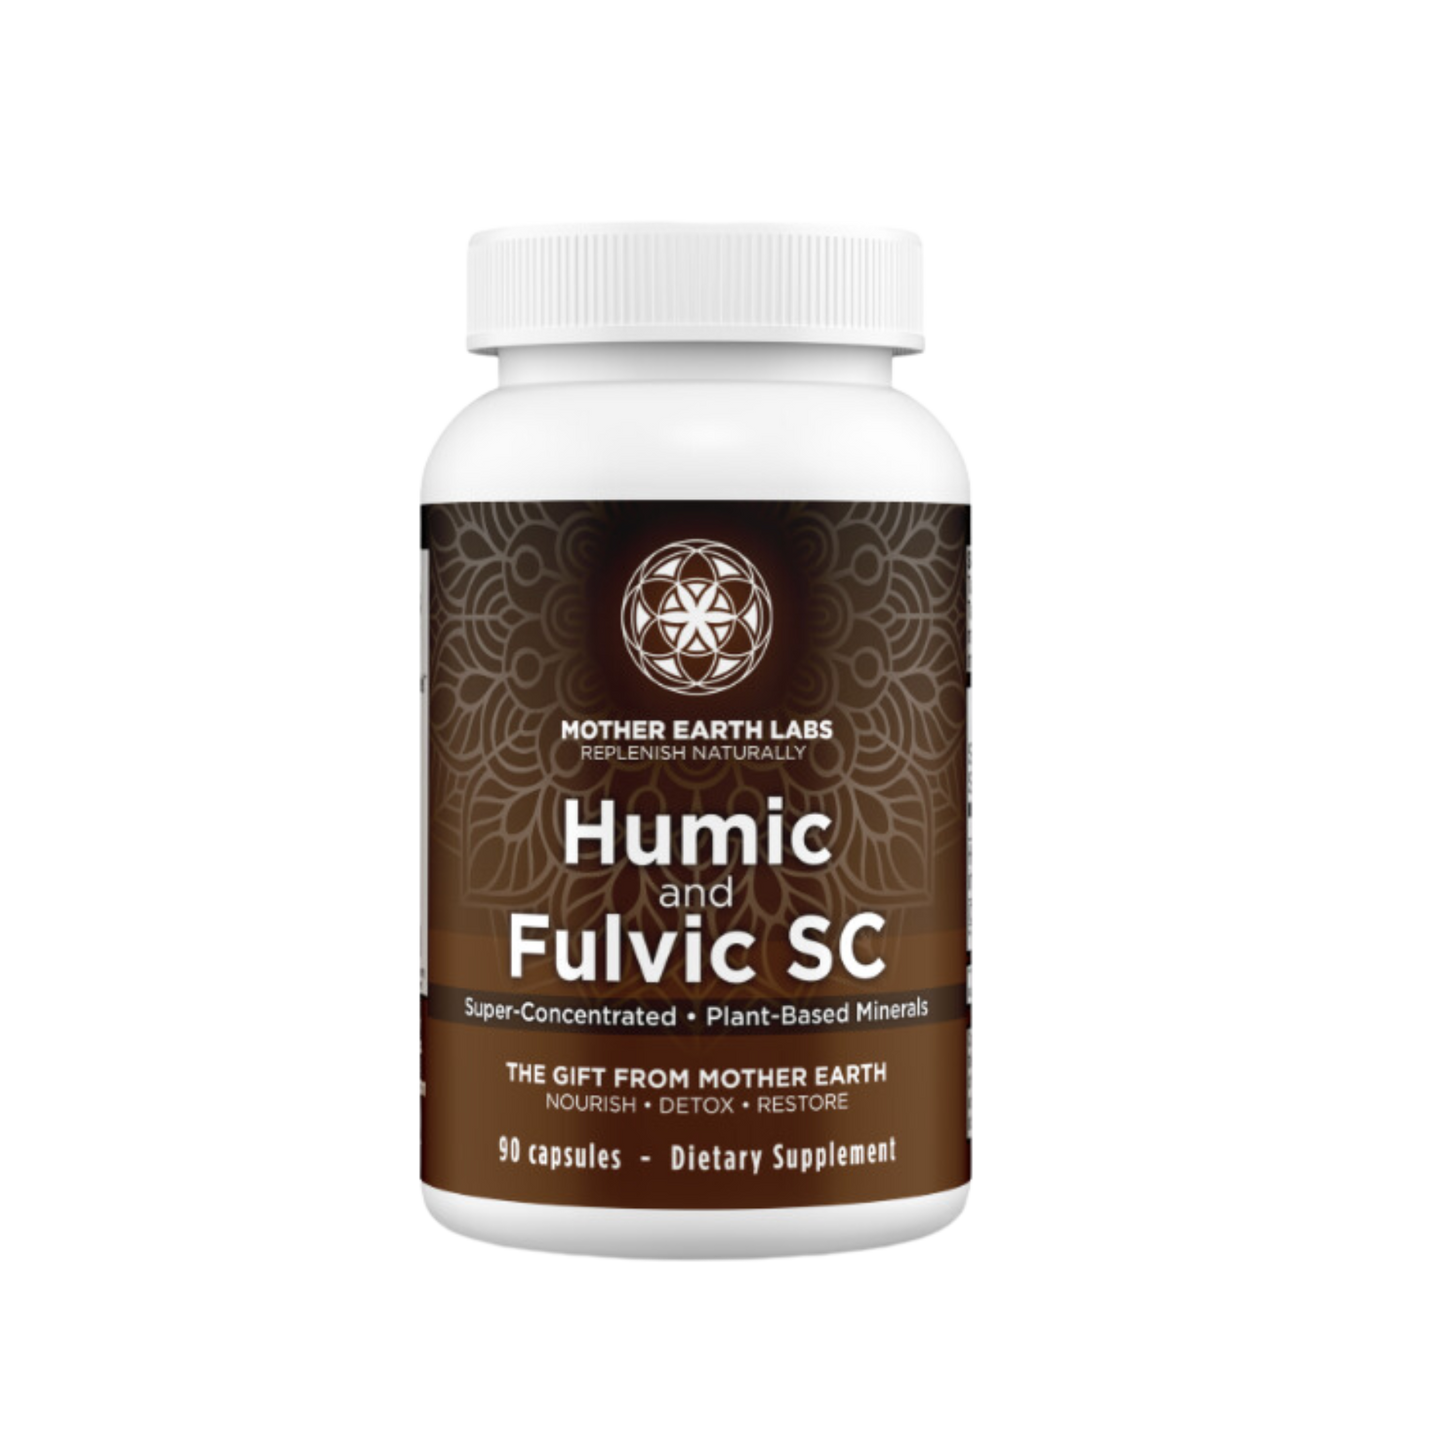 Mother Earth Labs Humic and Fulvic SC Capsules